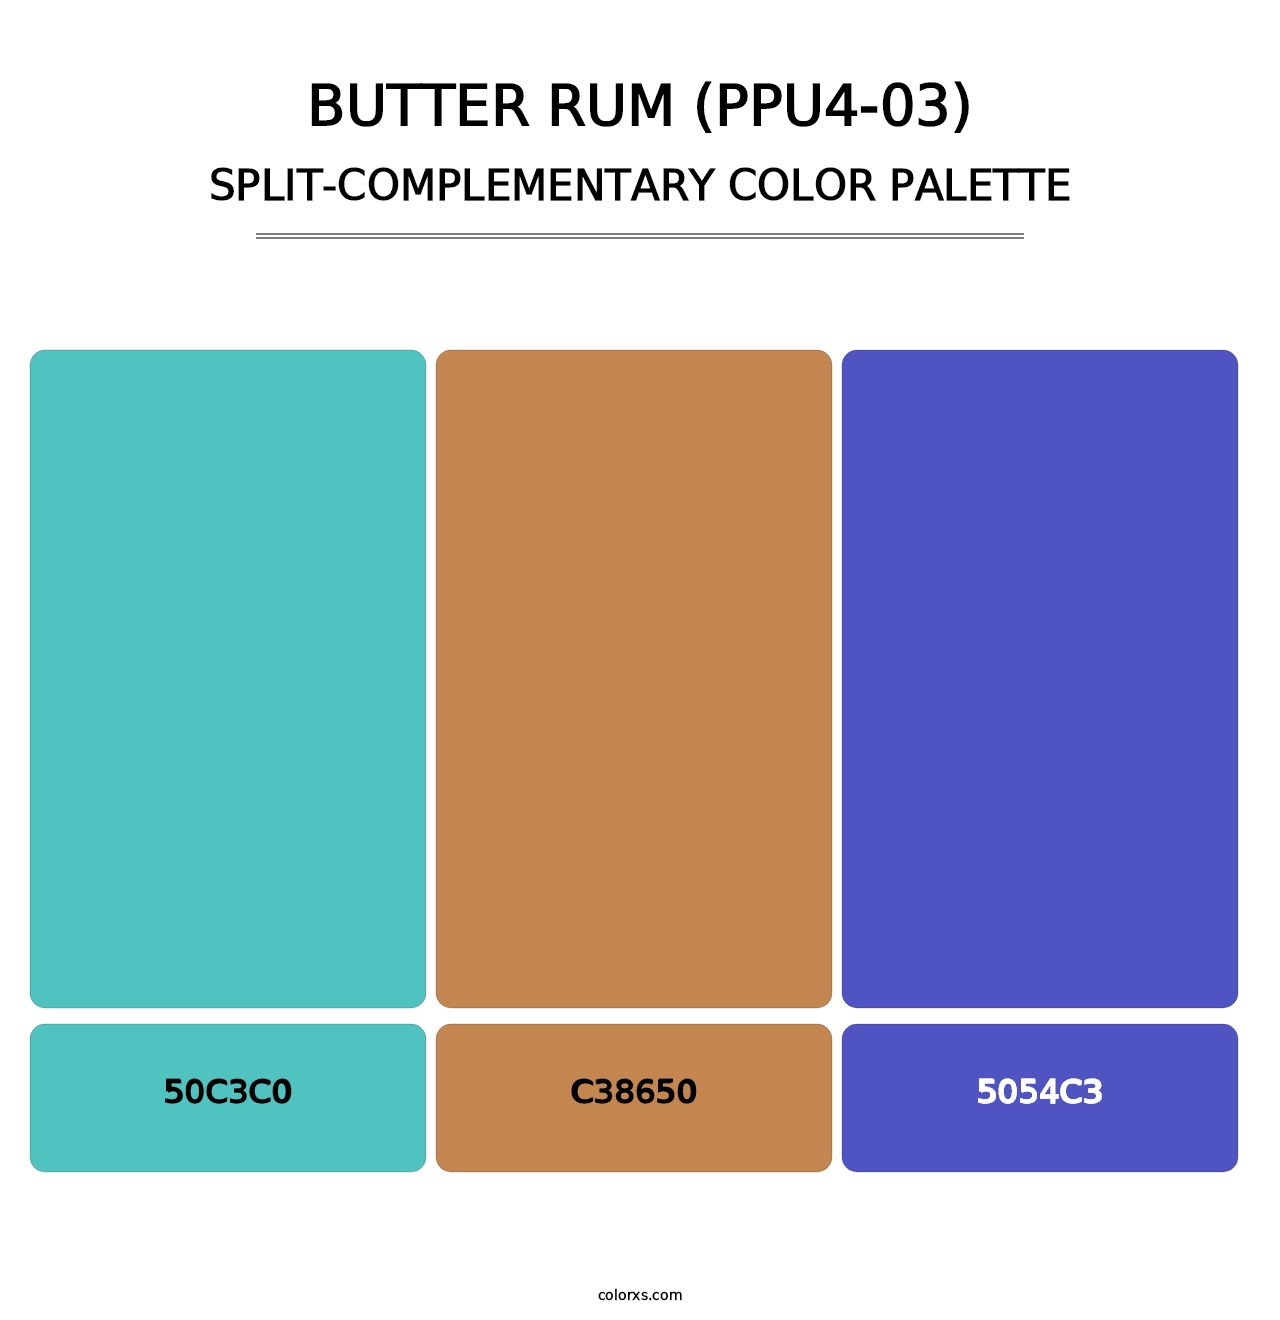 Butter Rum (PPU4-03) - Split-Complementary Color Palette